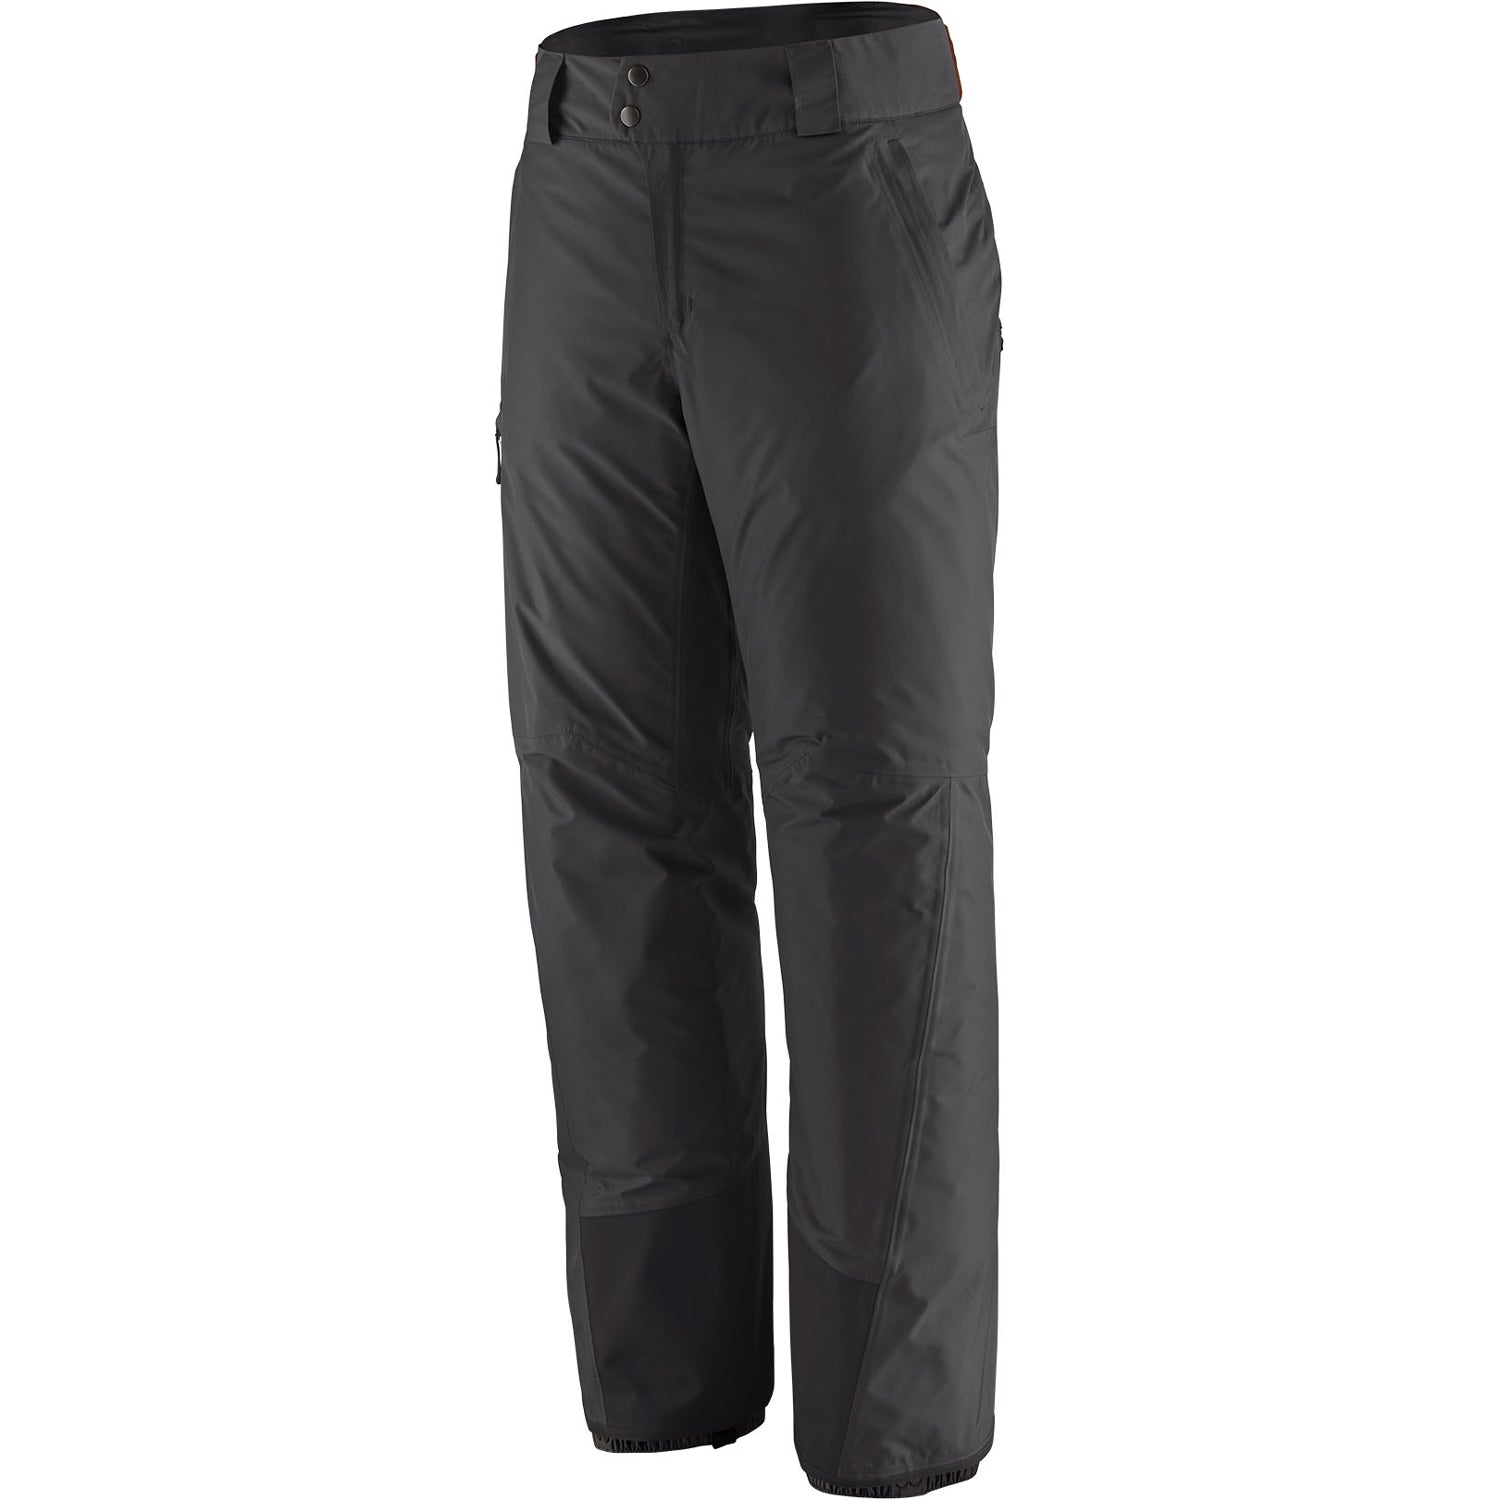 Patagonia Men's Insulated Powder Town Pants (Closeout) – Outdoorplay